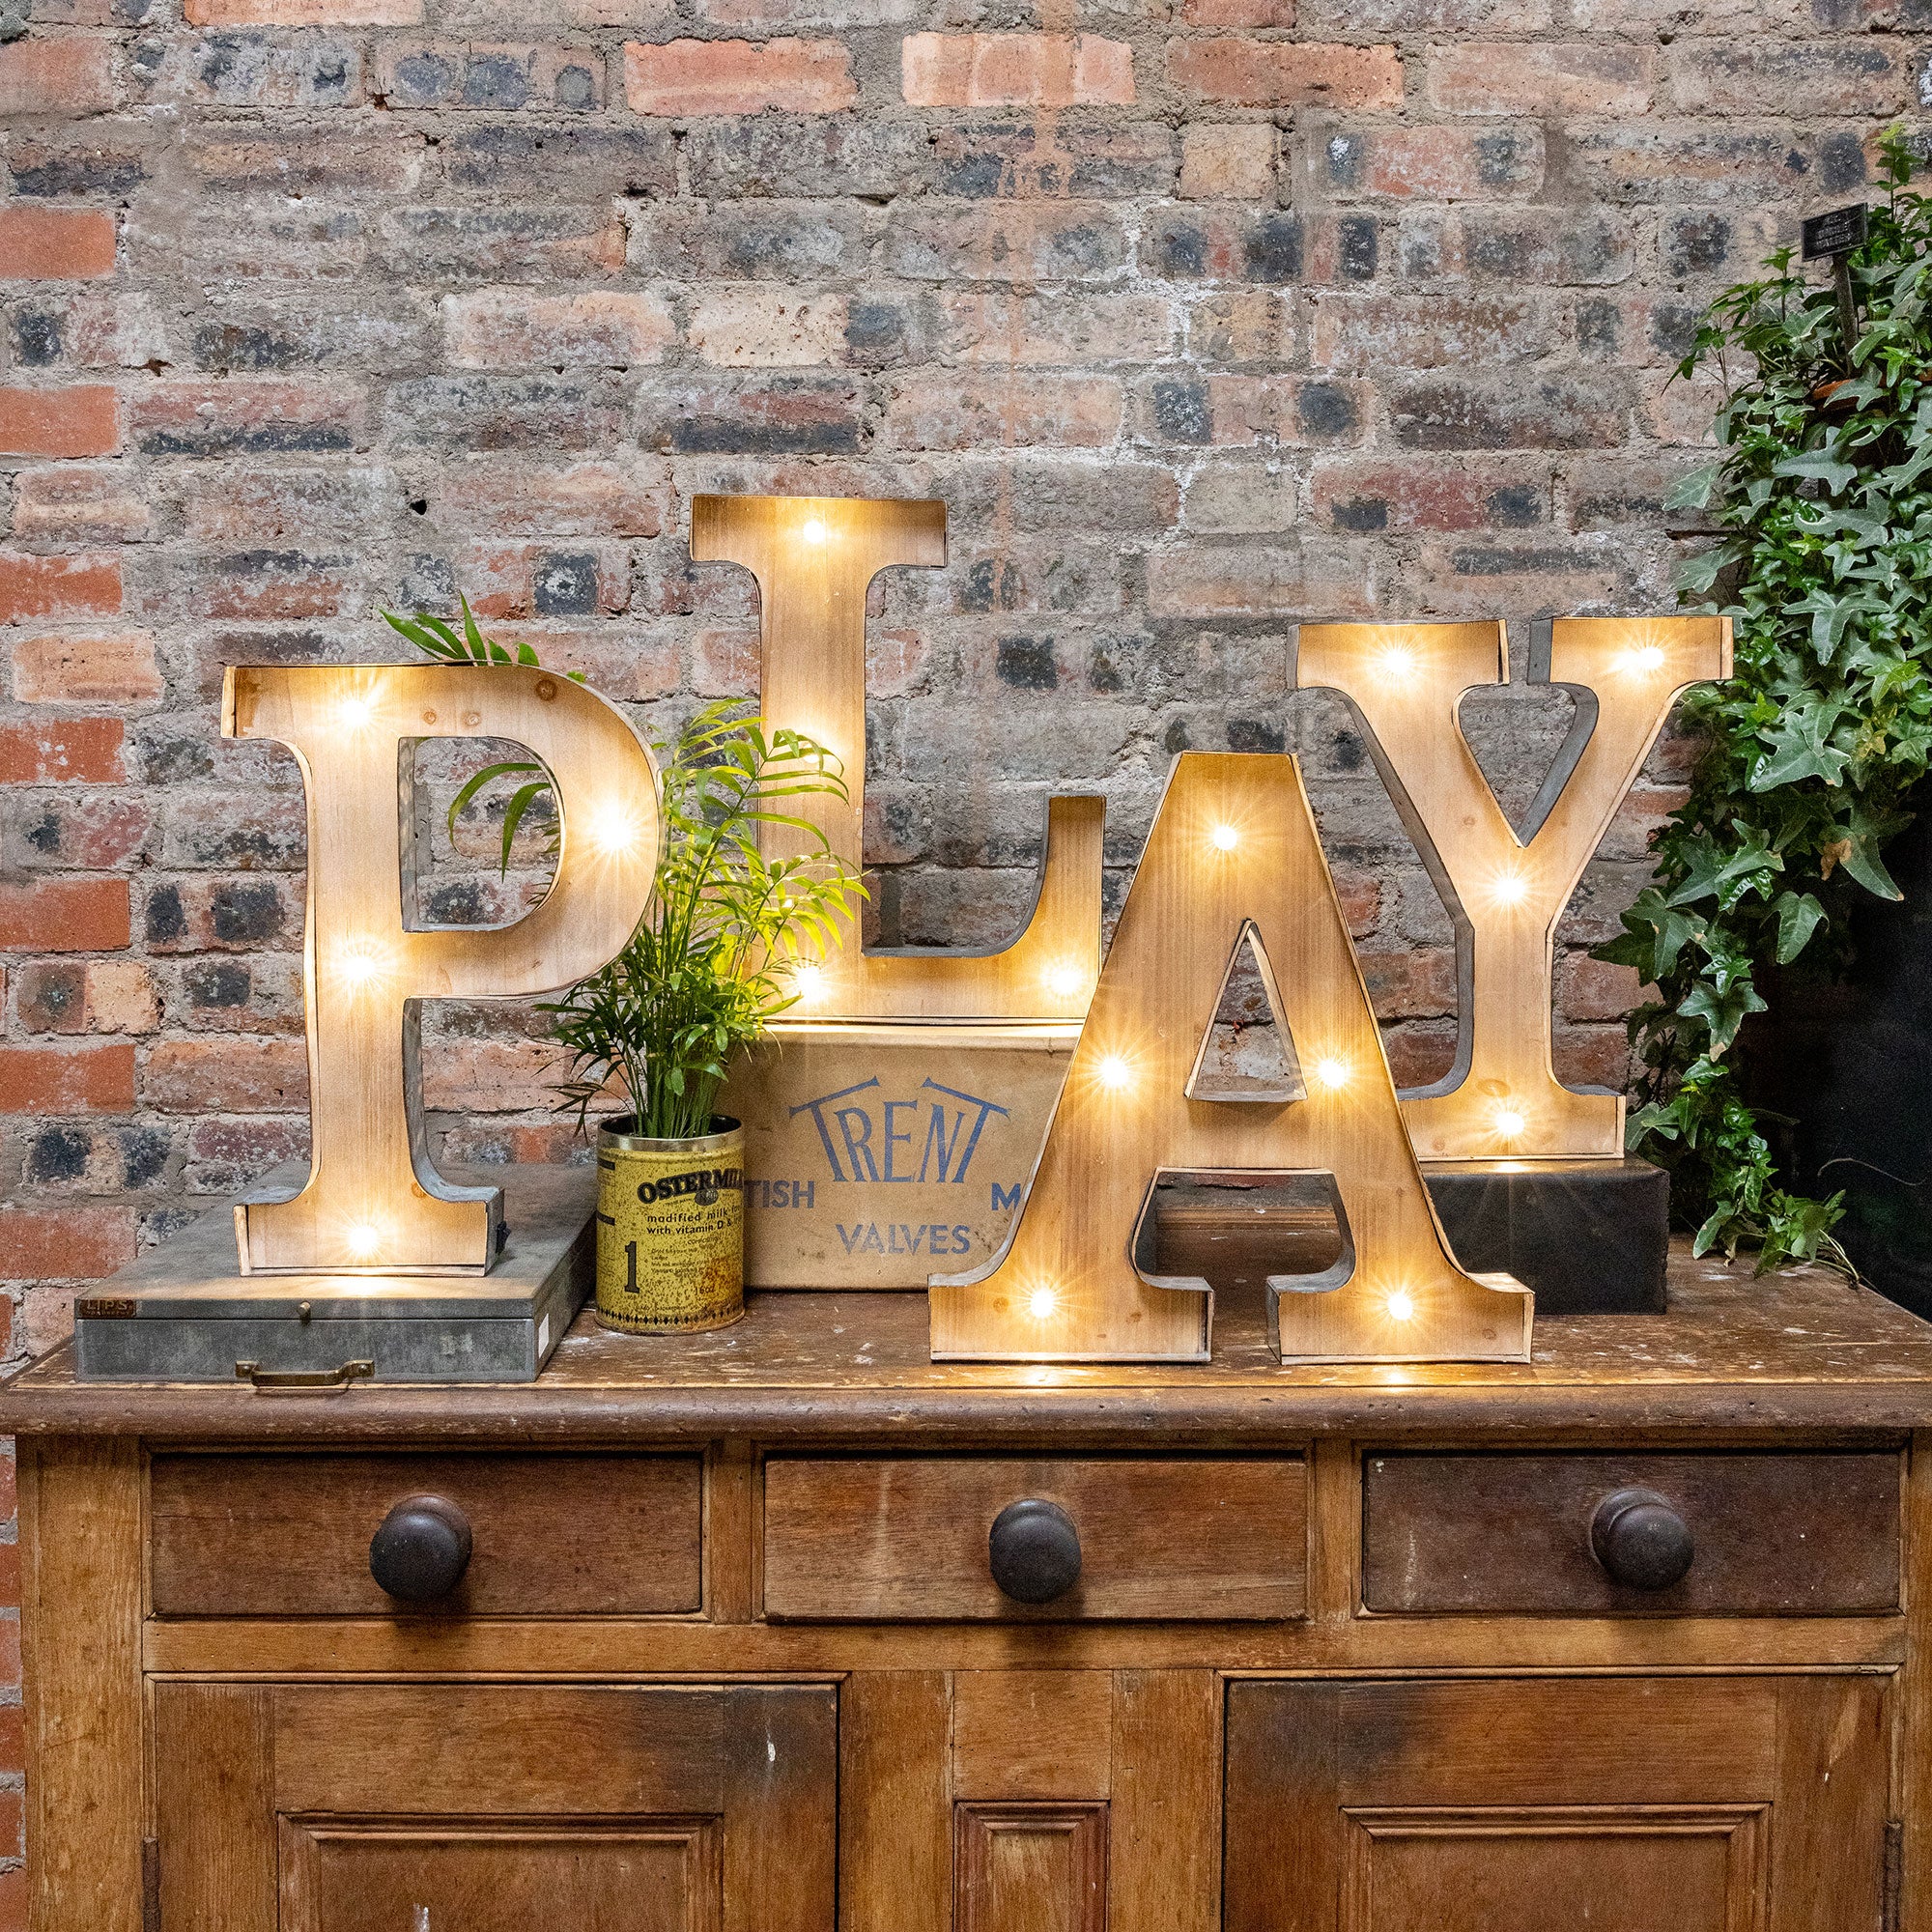 PLAY - Set of 4 XL Rustic LED Letter Lights